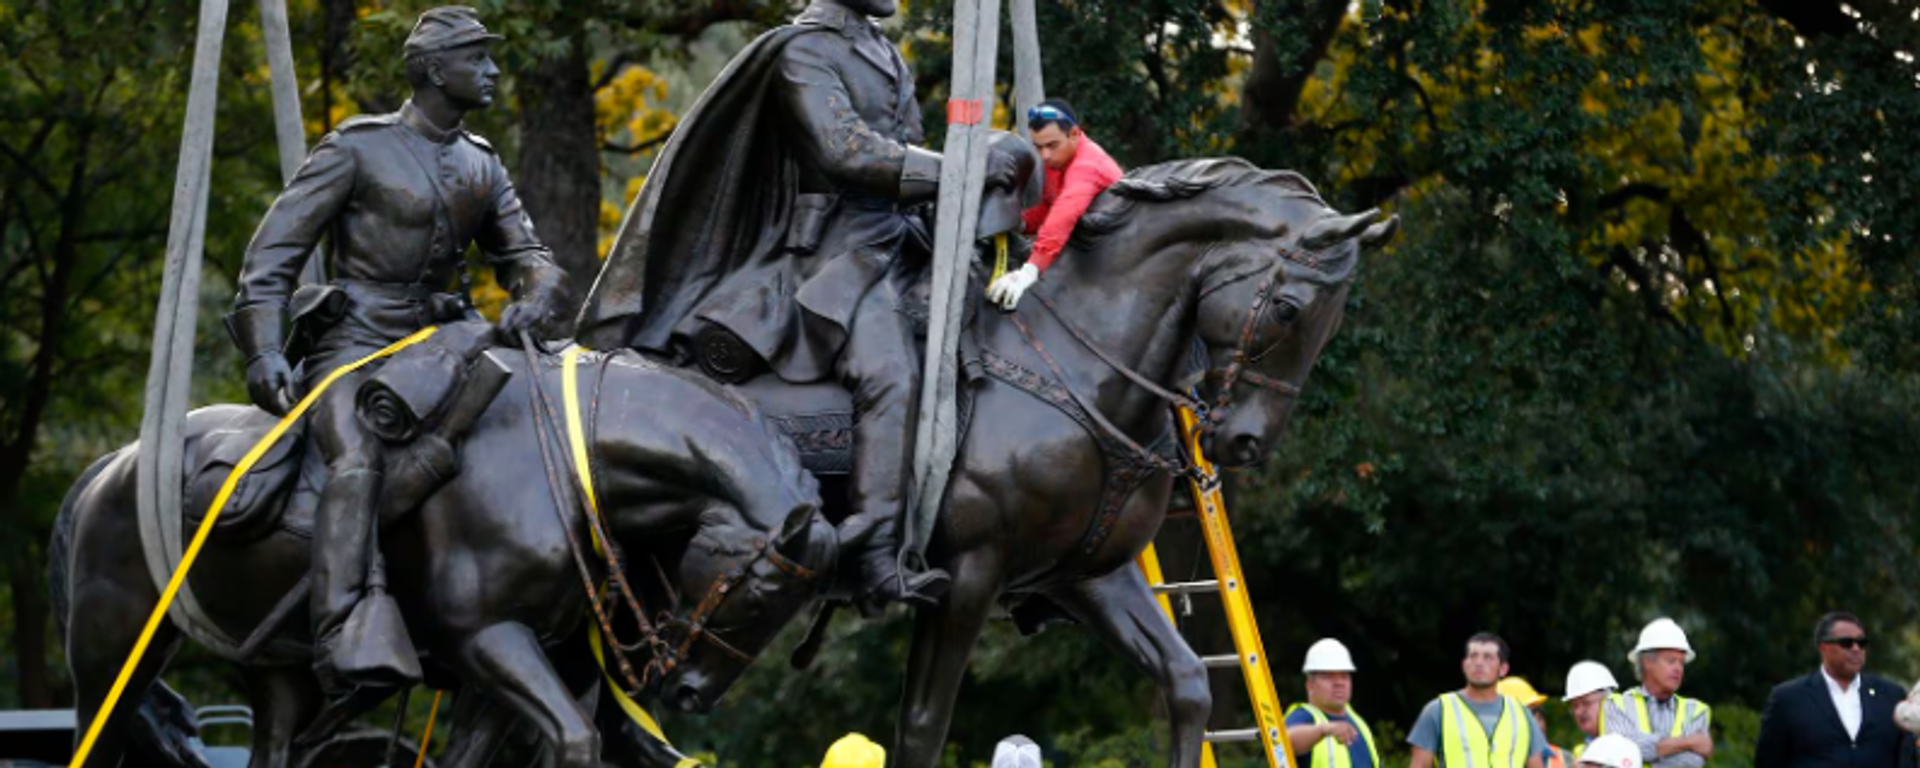 Workers harness the Robert E. Lee statue to a trailer for its removal from Robert E. Lee Park in Dallas on Sept. 14, 2017. - Sputnik International, 1920, 10.02.2024